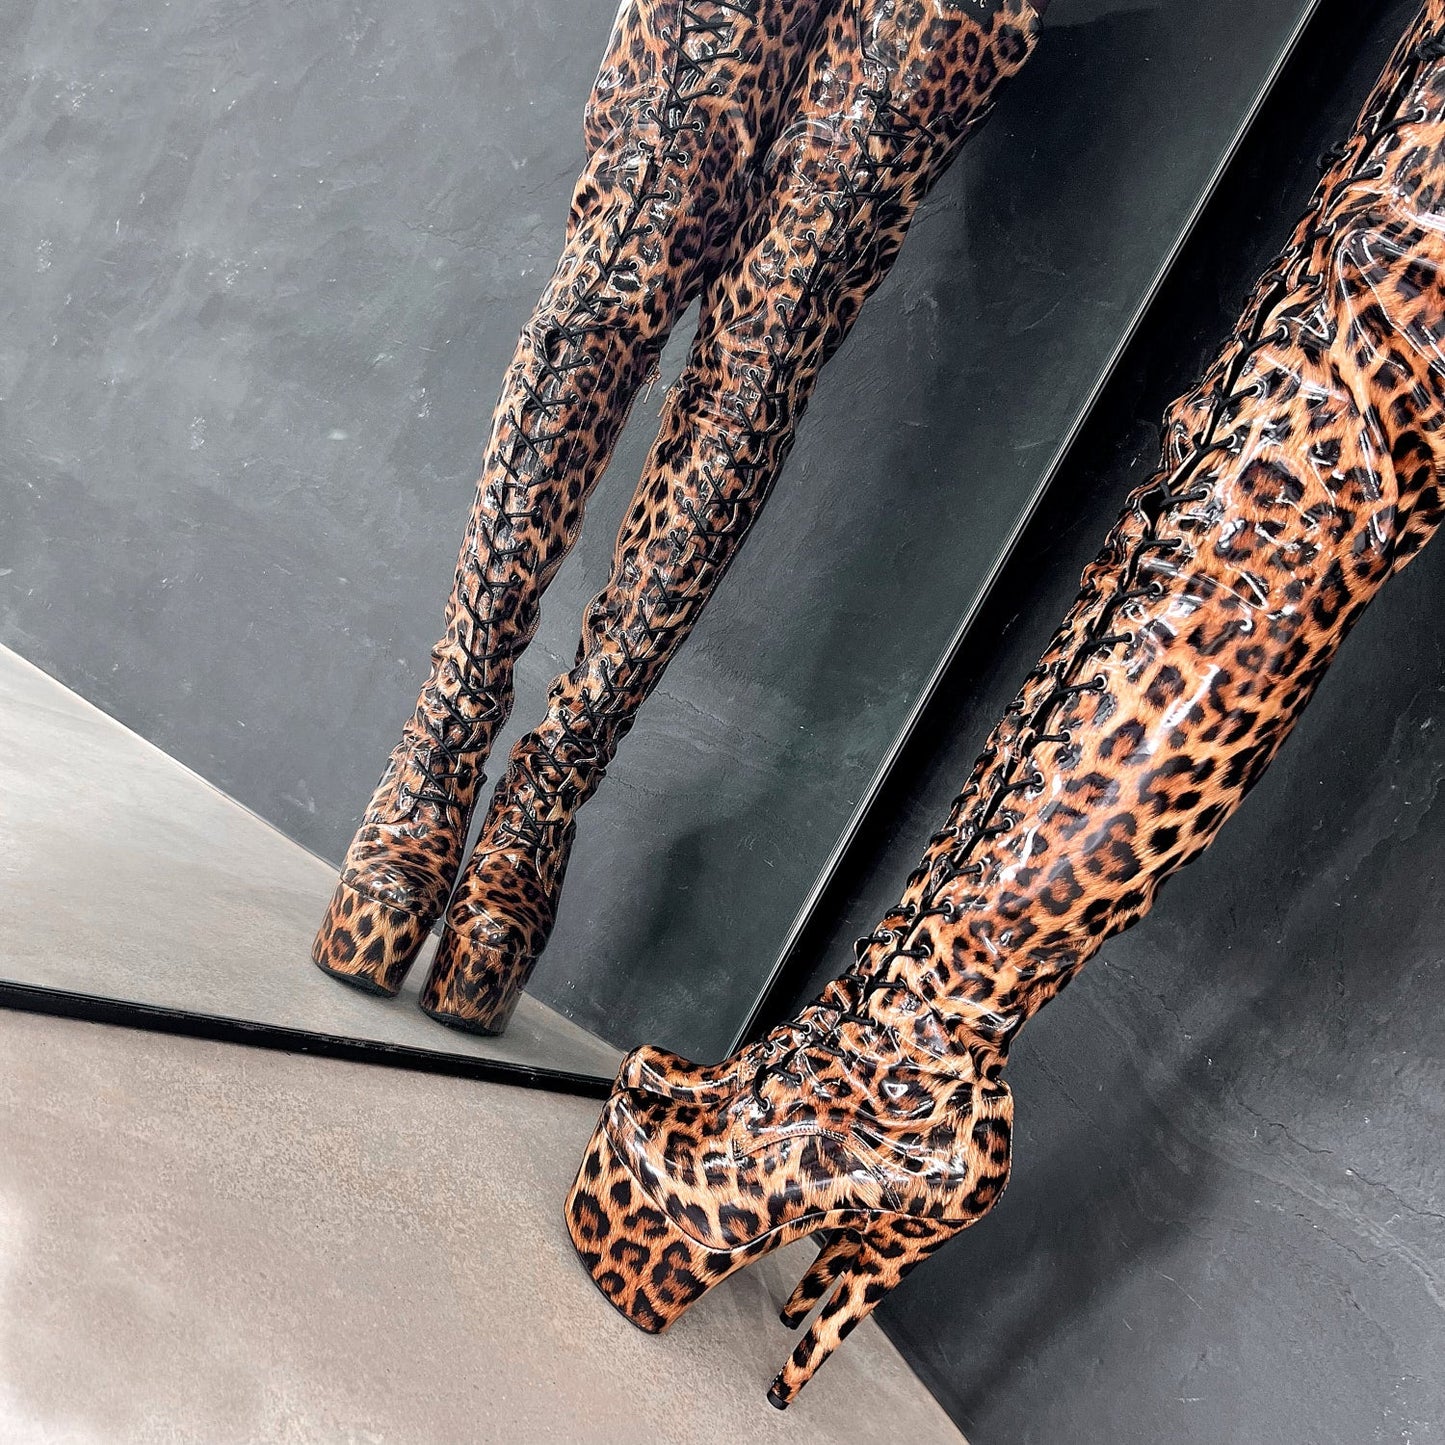 Leopard Thigh High - 7 INCH + SP - Limited Edition